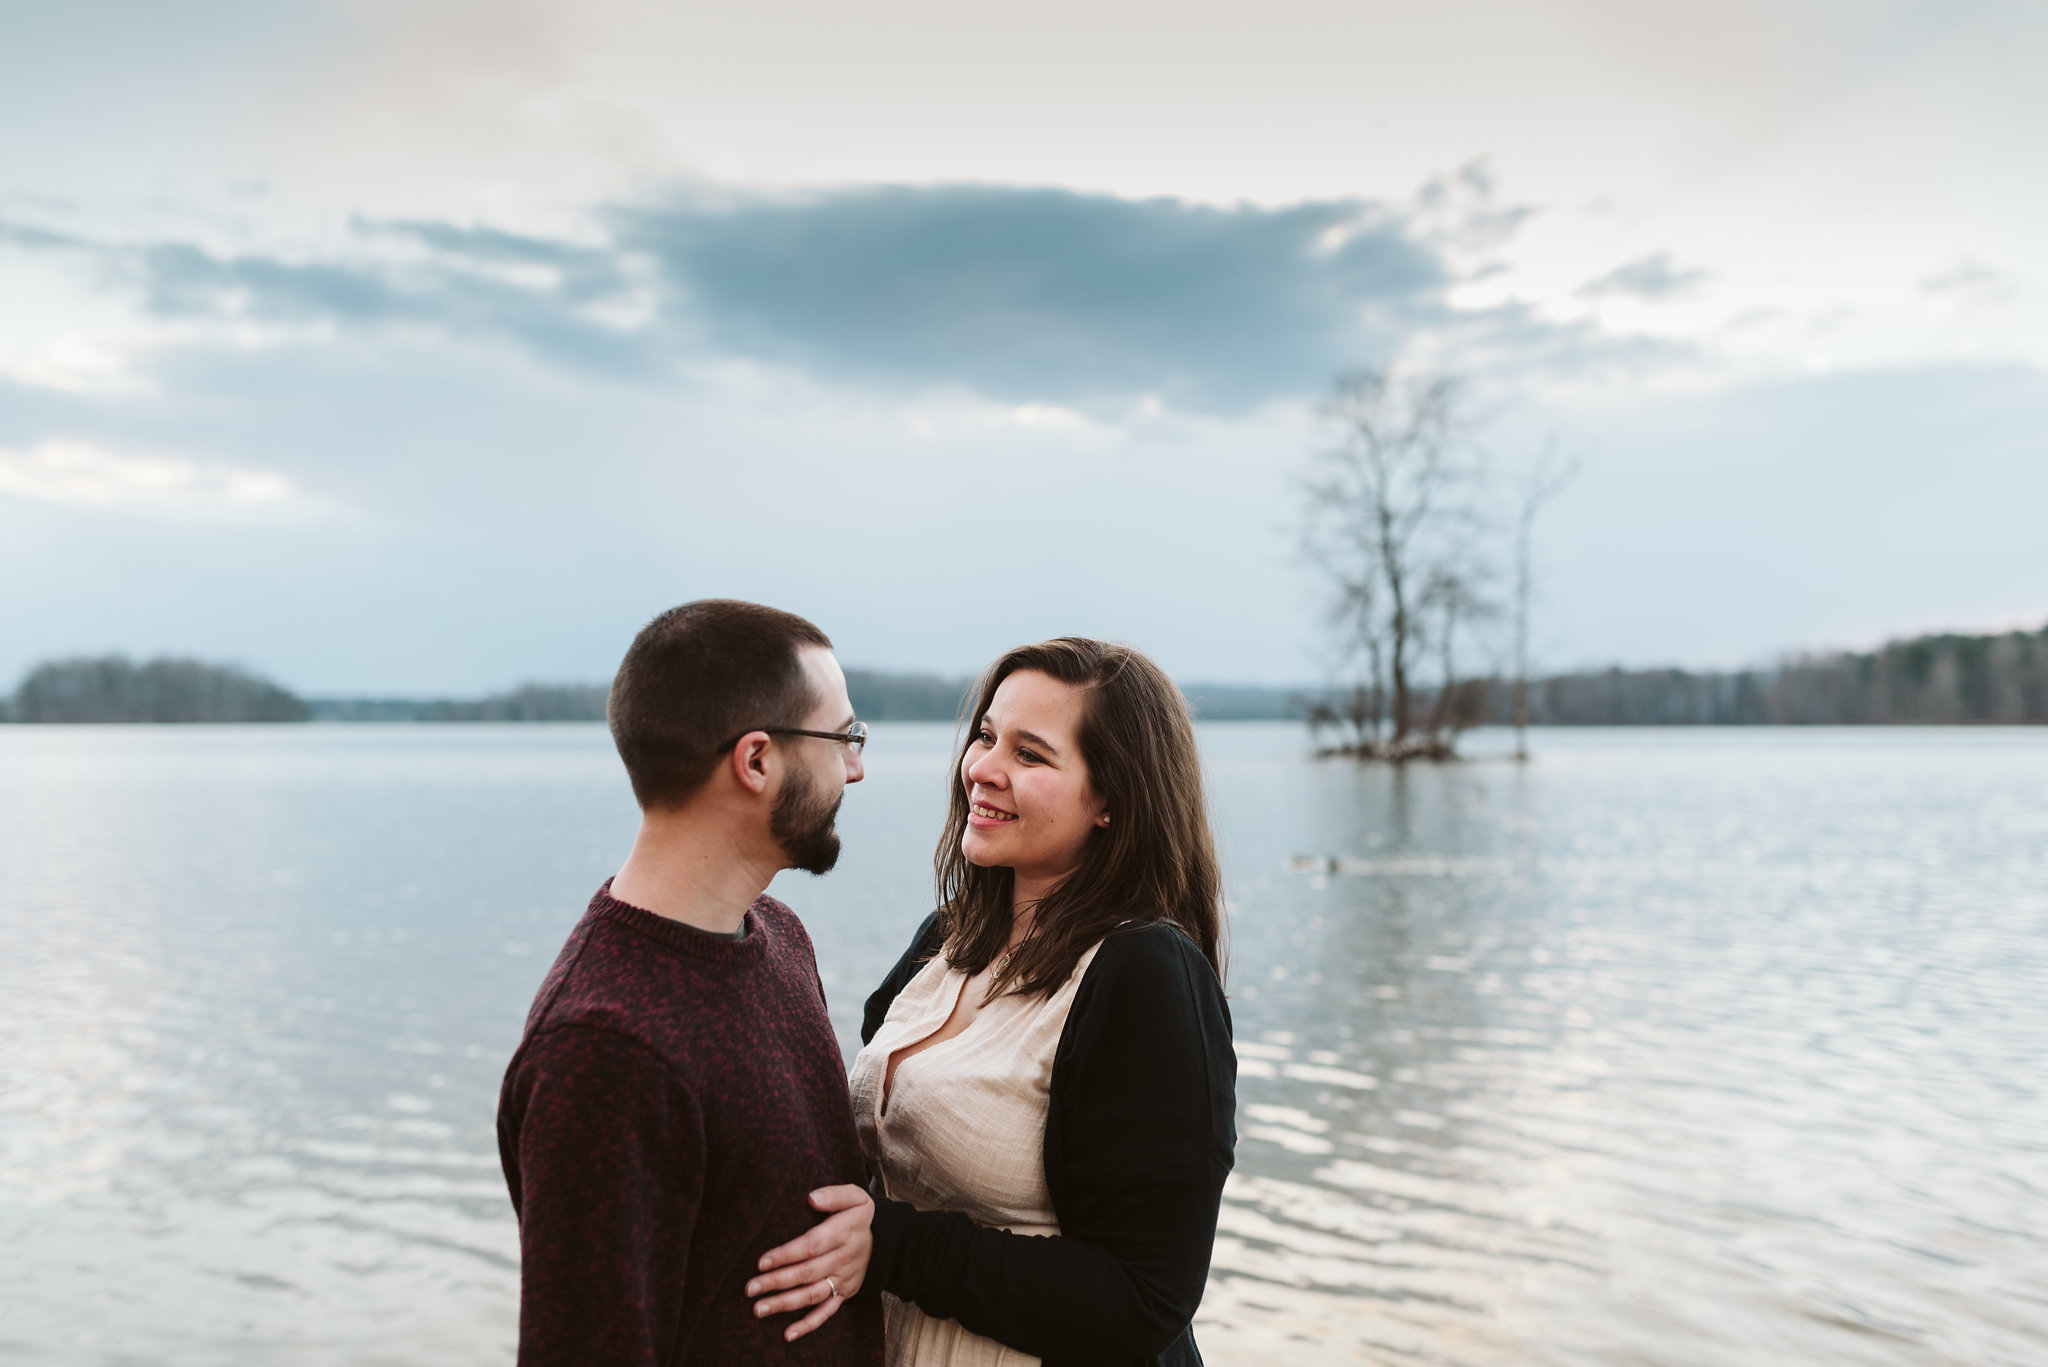  Baltimore County, Loch Raven Reservoir, Maryland Wedding Photographer, Winter, Engagement Photos, Nature, Romantic, Bride and Groom Smiling at Each Other in Front of Water, Outdoors, Rustic 